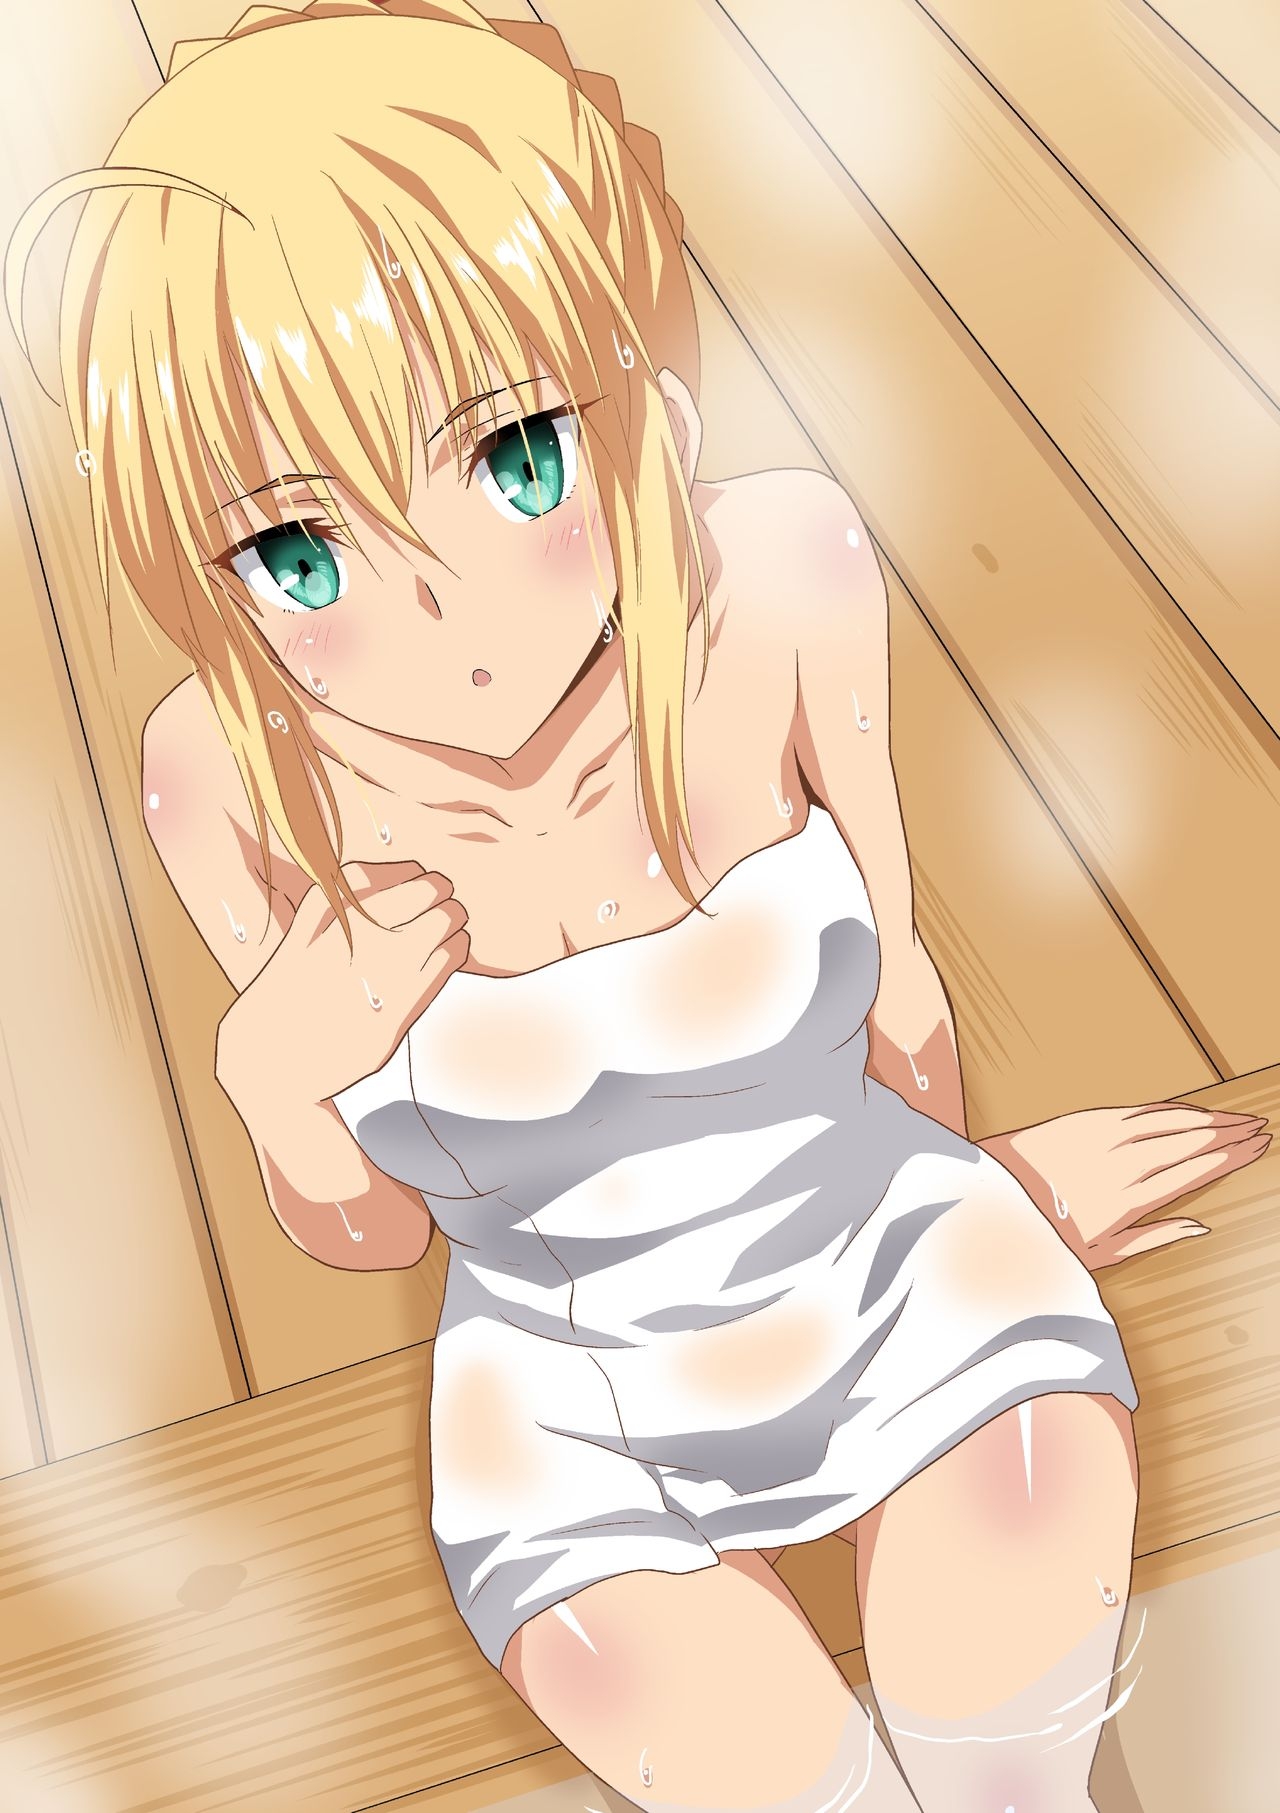 [Hara] Saber to Omake (Fate/stay night) 7